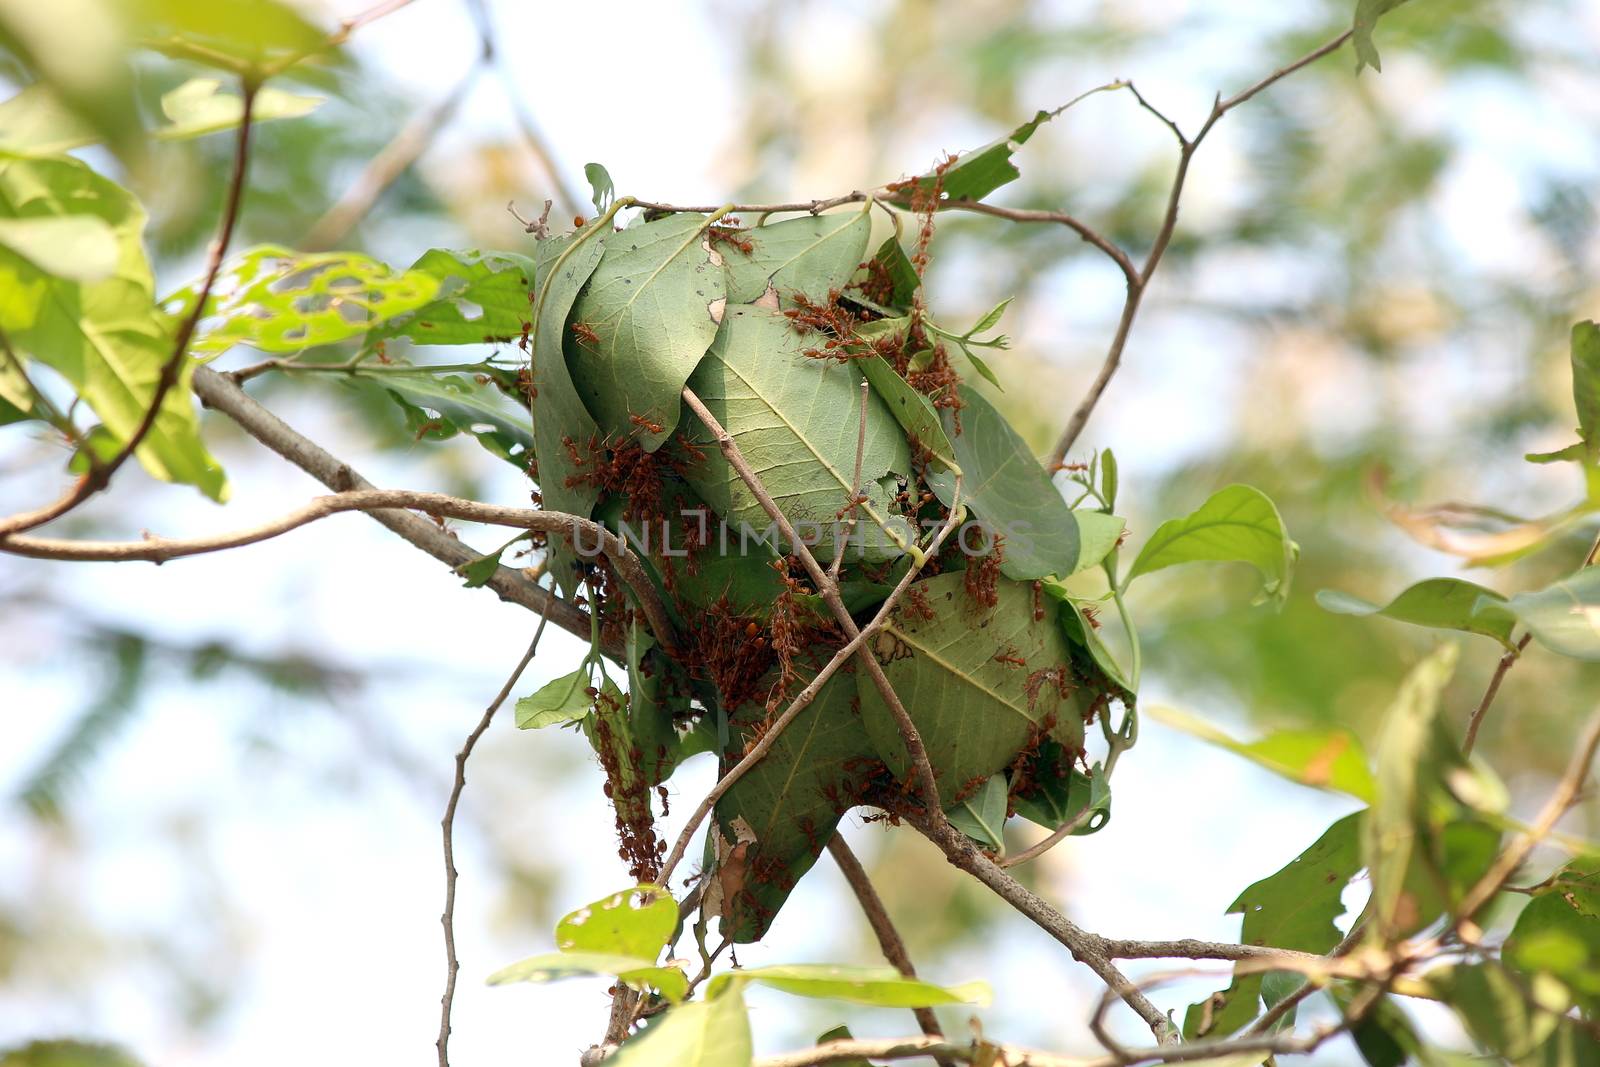 Ant, Ants nest on green leaves of a tree by joining together by cgdeaw